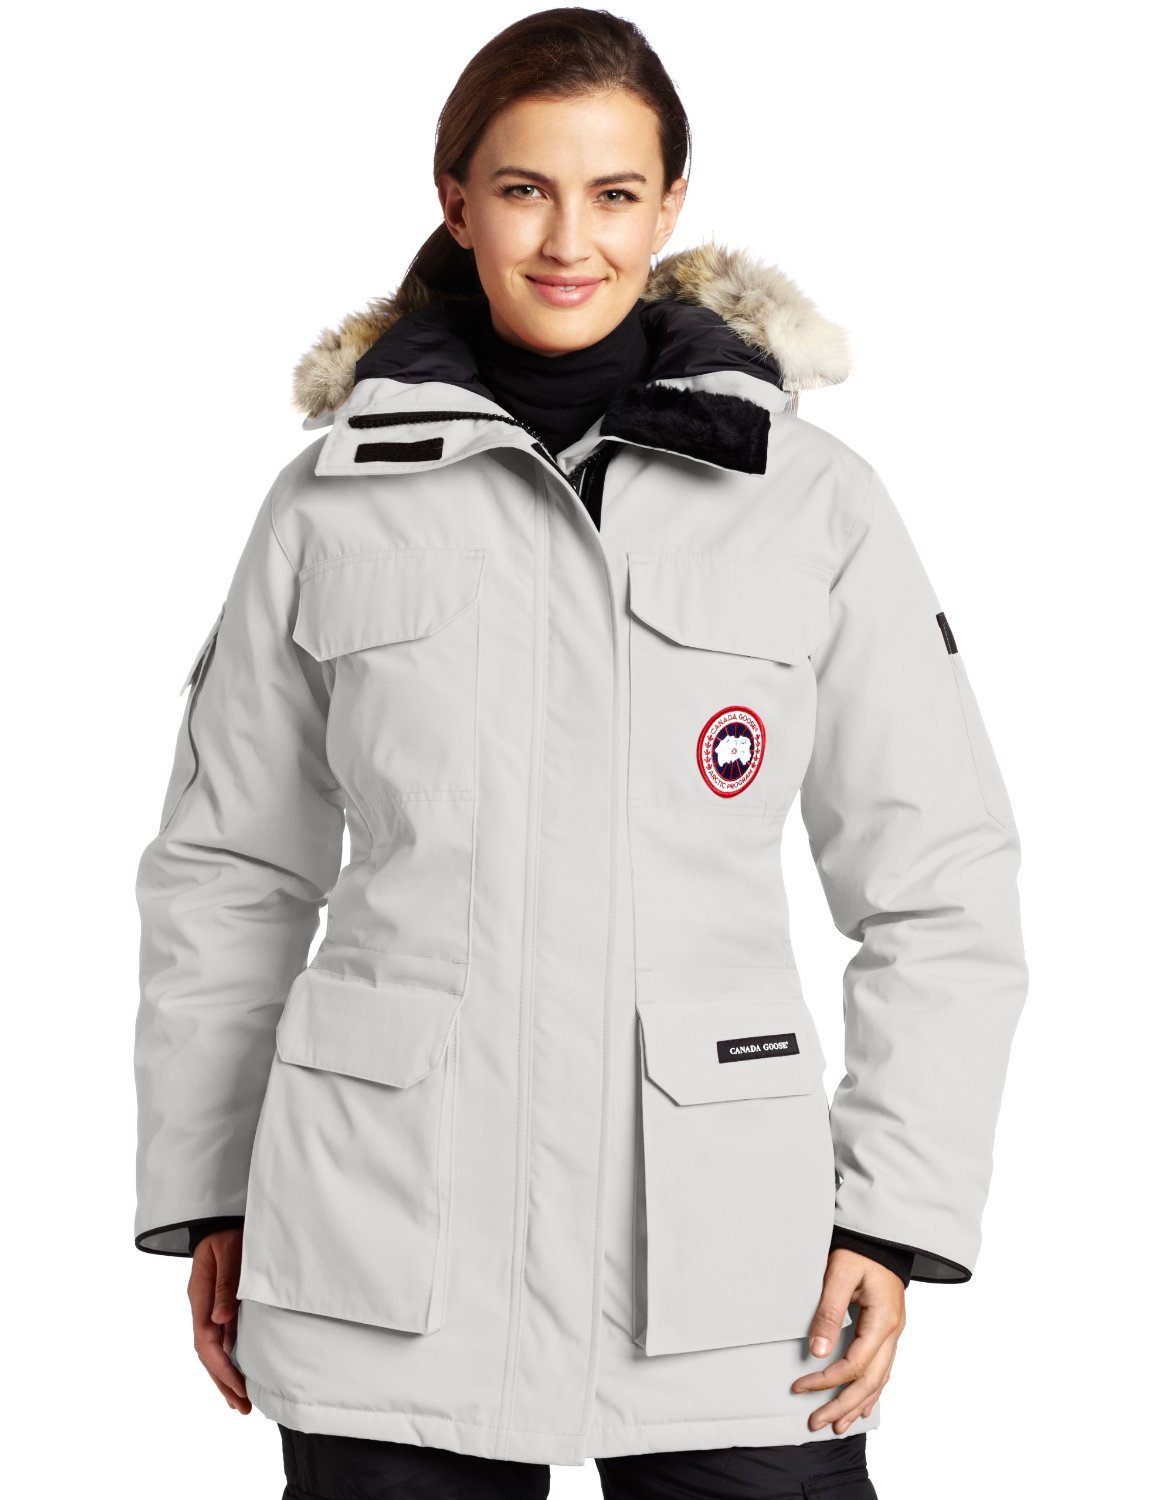 Canada Goose expedition parka sale store - 70% OFF Canada Goose Jakke Tilbud - Canada Goose Jakke Dame ...